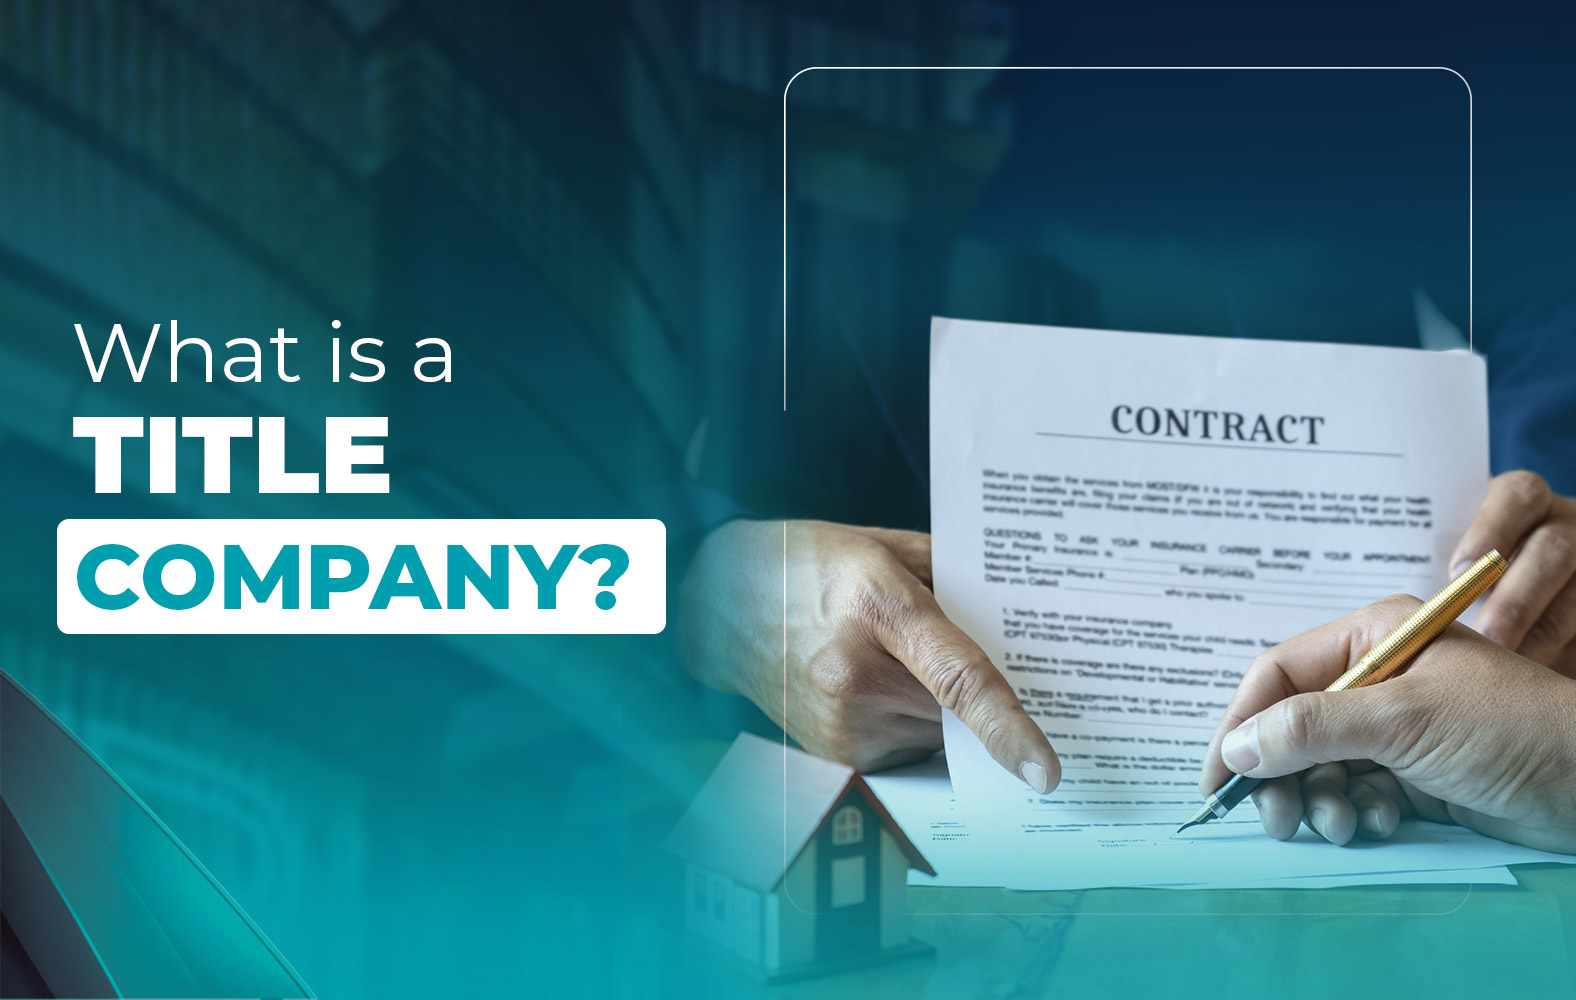 Do you know what the work of a title company is?